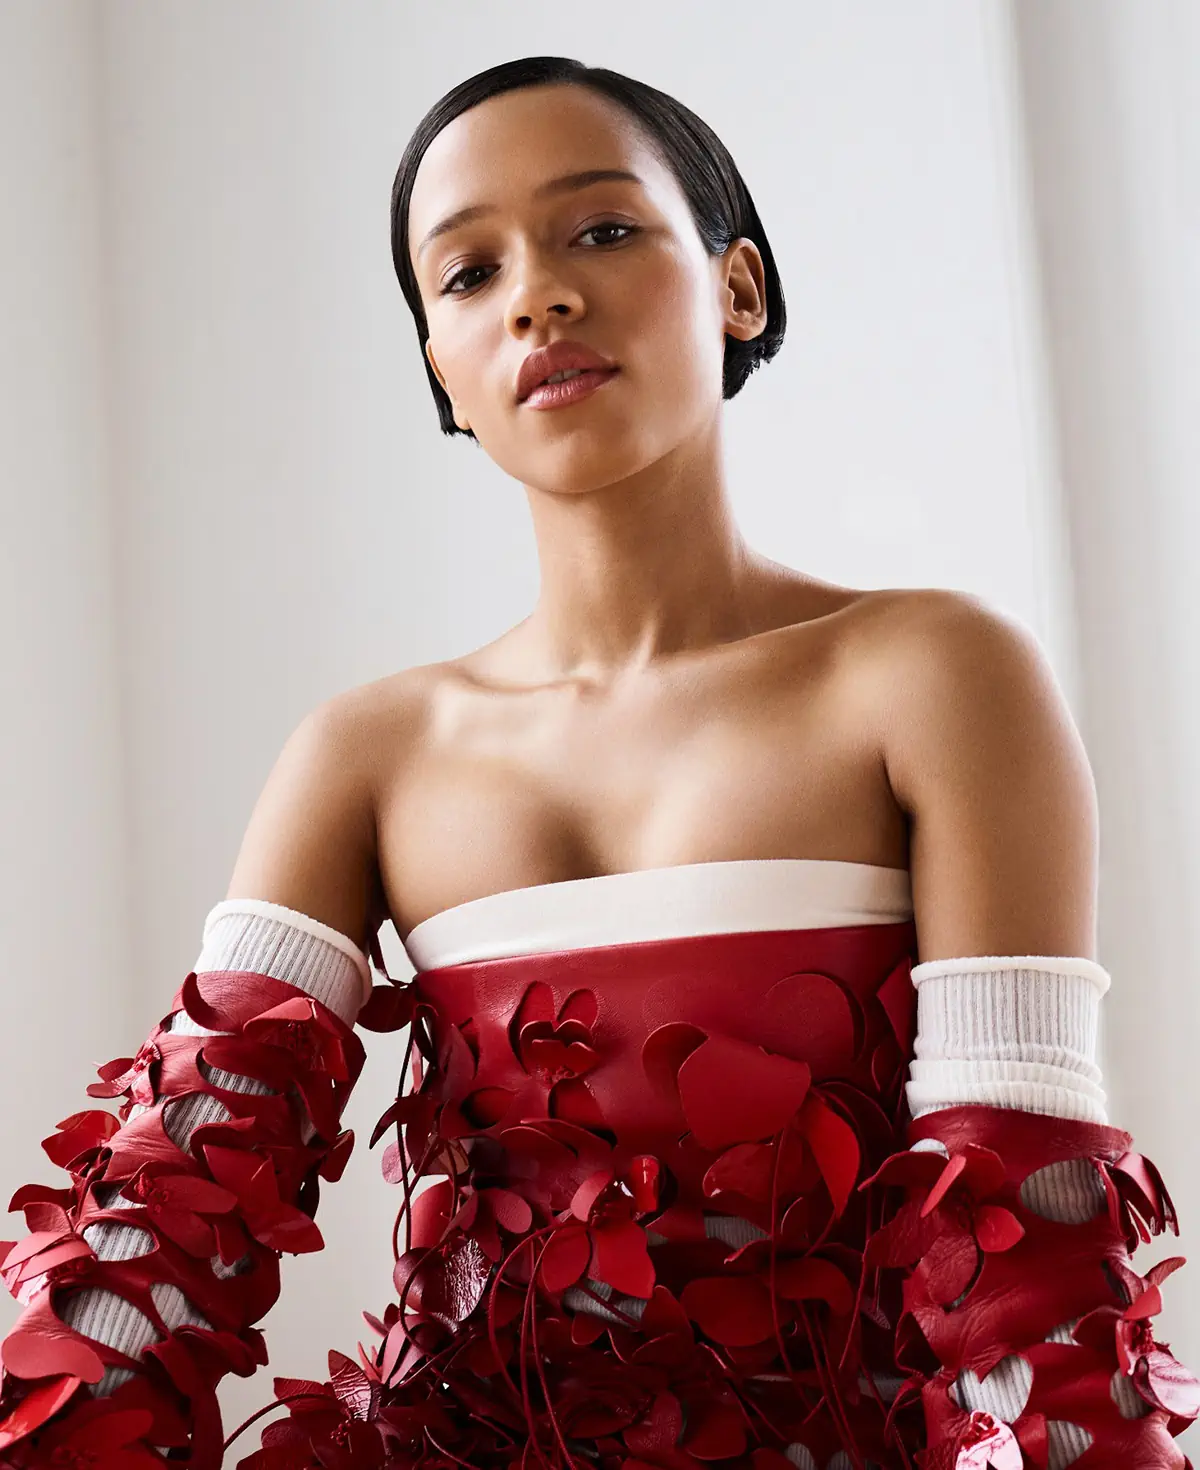 Taylor Russell covers Harper’s Bazaar US February 2023 by Amy Troost